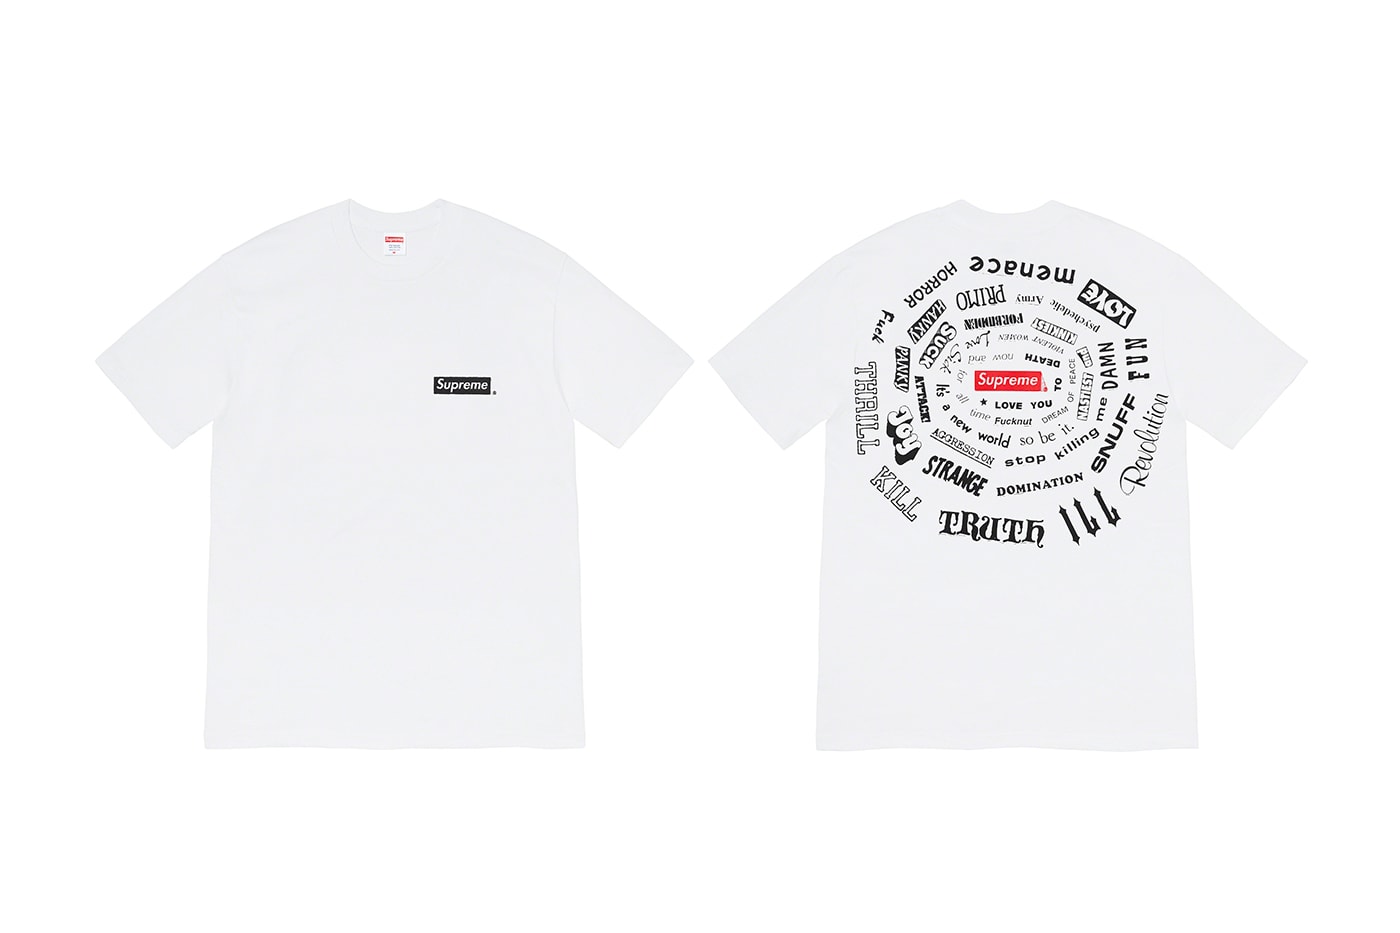 The Supreme T-shirts of Spring 2021